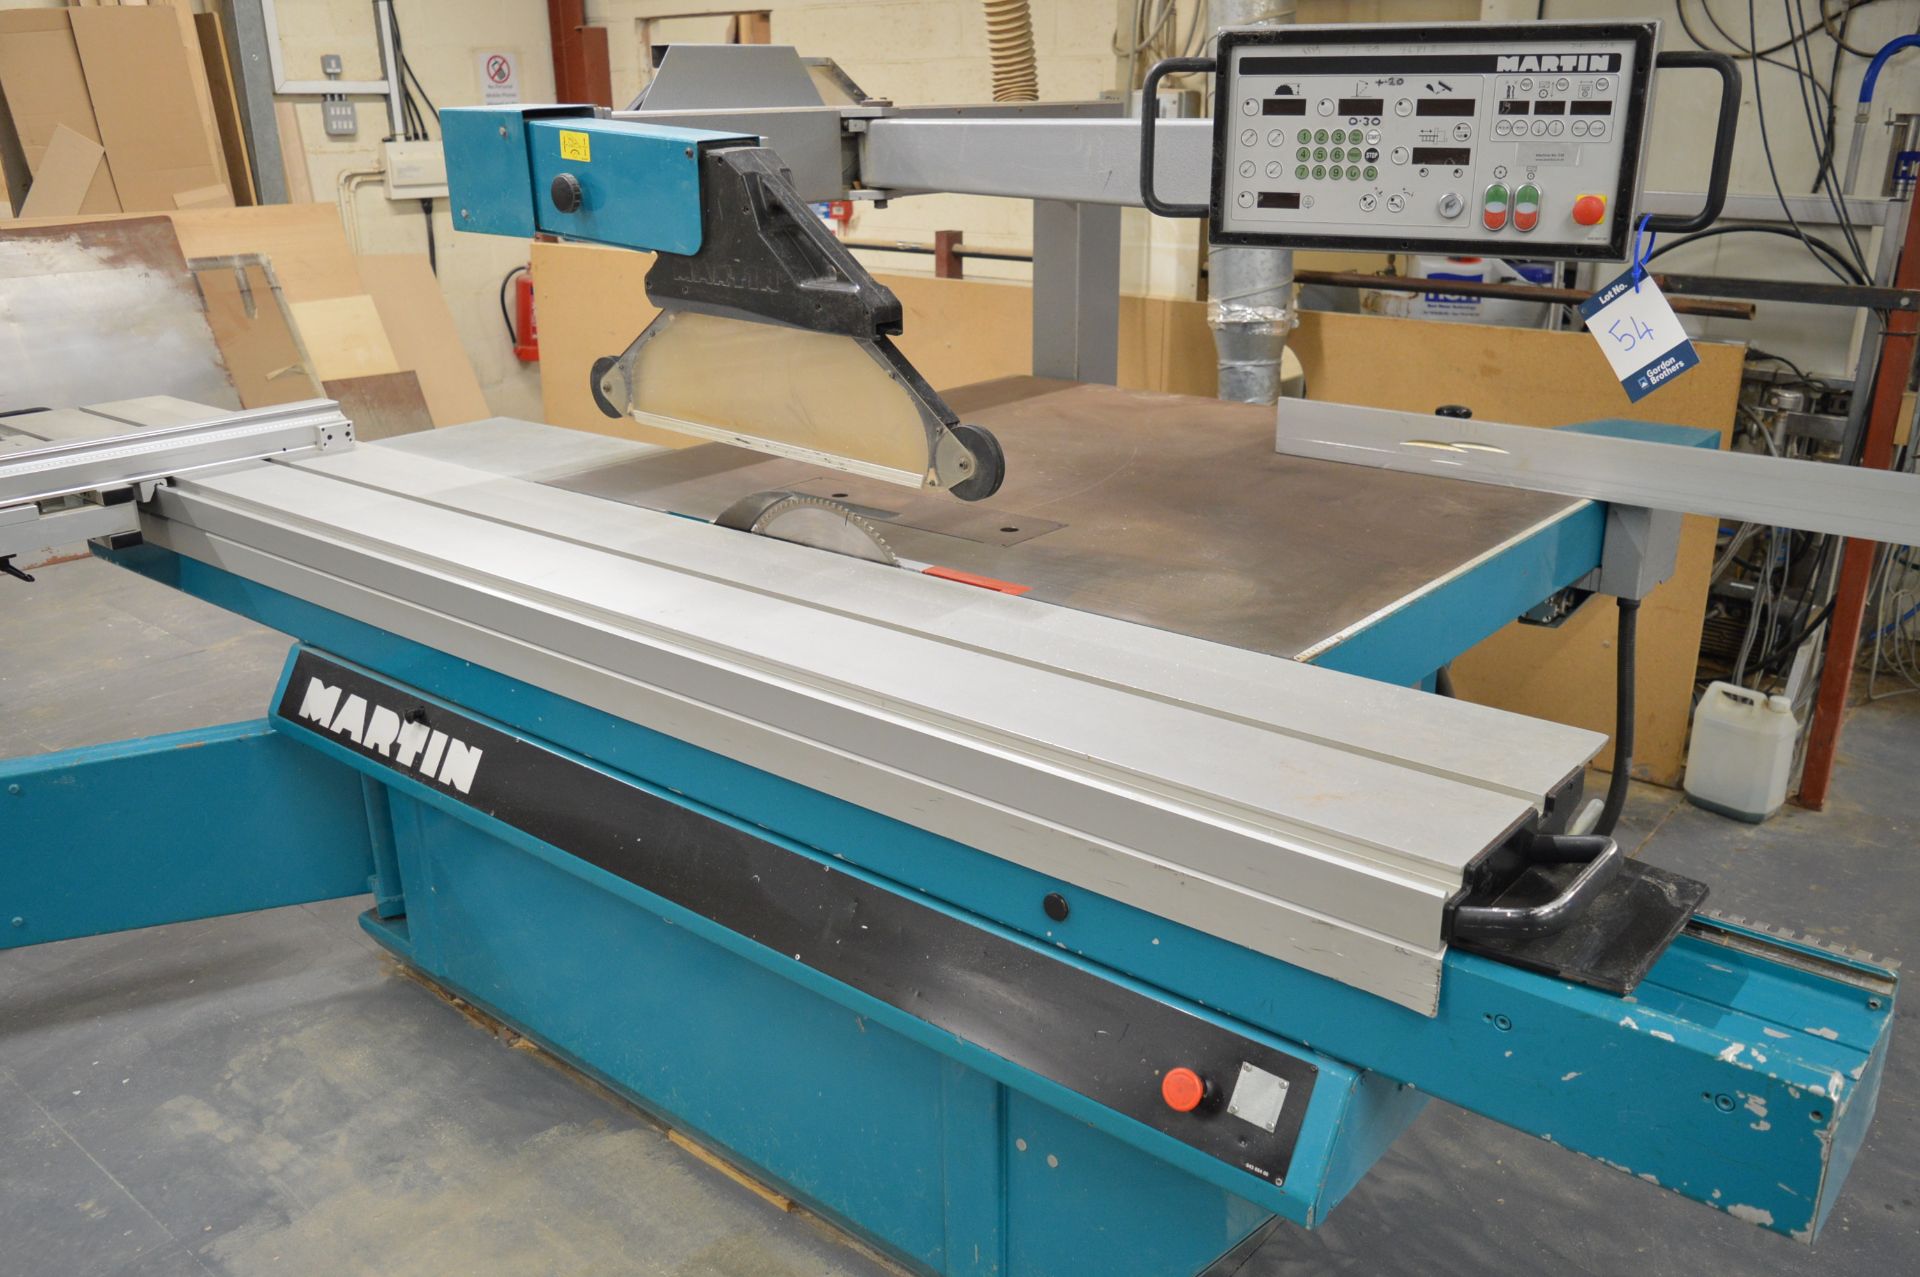 Martin T73 automatic sliding panel saw, Serial No. V429906 (2002), Saw Blade. Min 250mm / Max. - Image 2 of 7